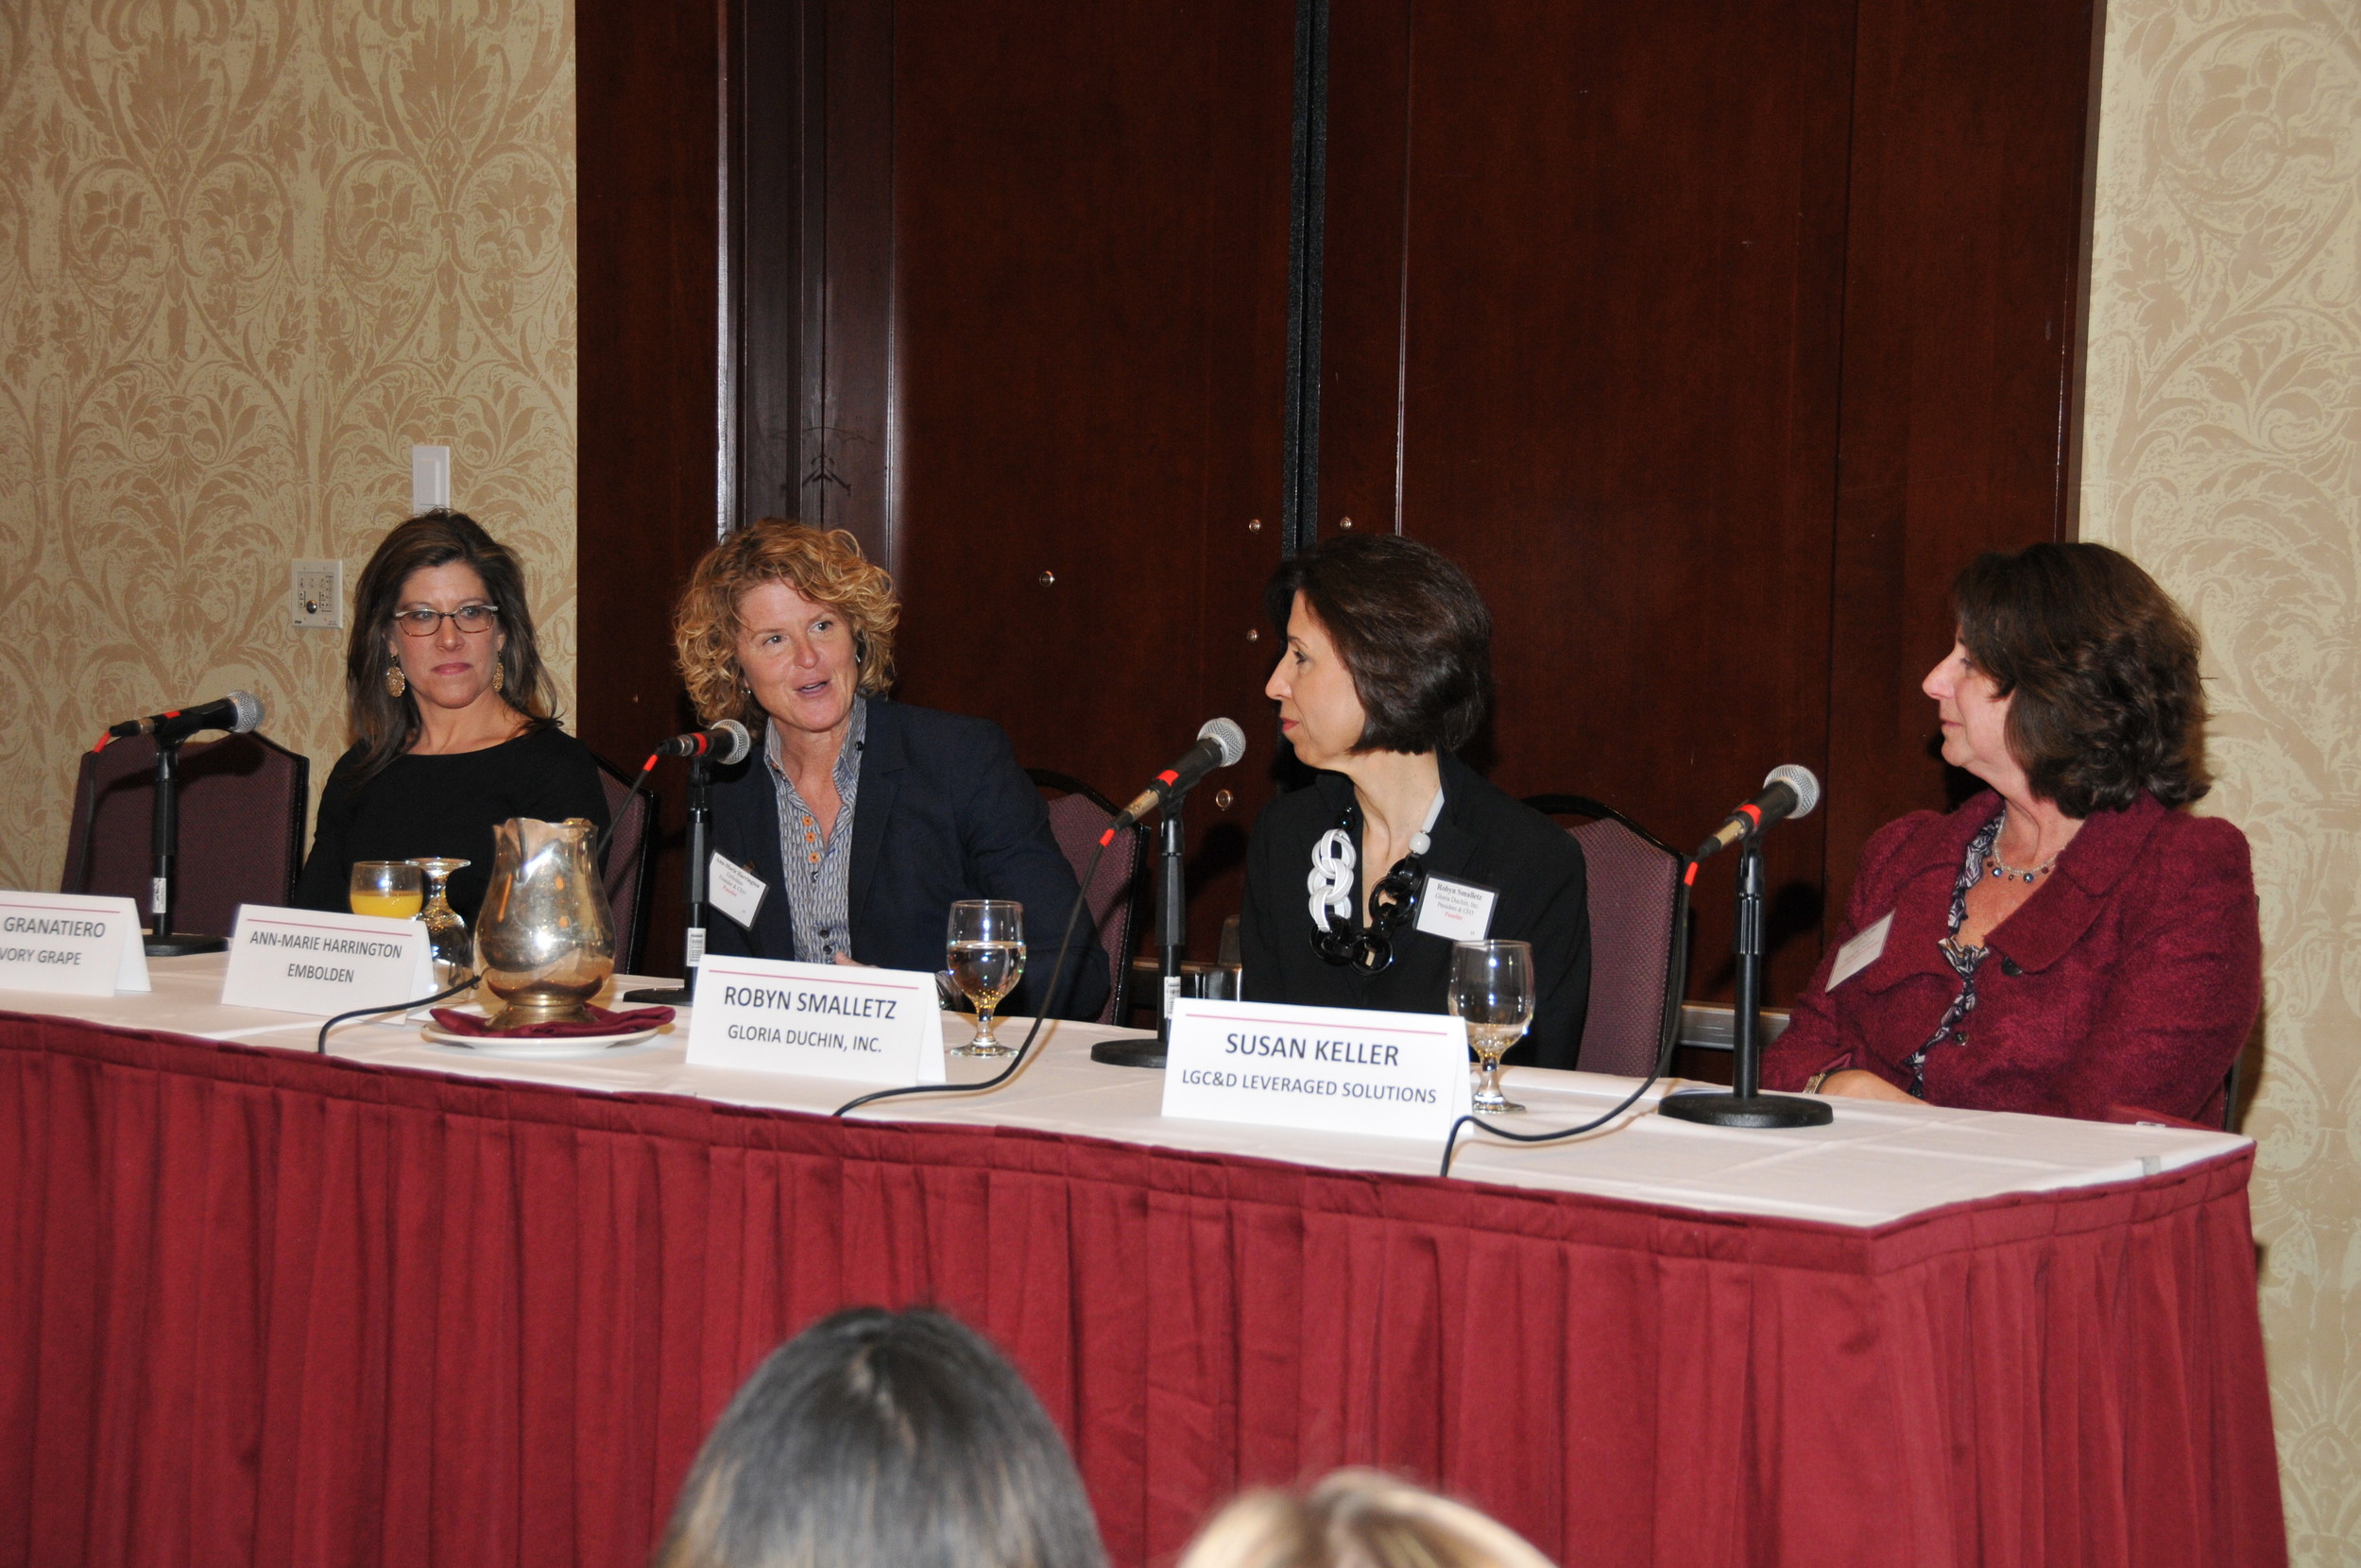 WITH MORE THAN 200 in attendance at the Crowne Plaza Providence-Warwick, the two panels at PBN's inaugural Business Women Summit on Leadership & Entrepreneurship took on issues that included achieving success in a corporate environment as well as how to succeed at starting your own business. Ann-Marie Harrington, founder and CEO of Embolden, second from left, speaks to the second topic on a panel that includes, from left, Jessica Granatiero, owner and president of The Savory Grape and The Savory Affair, Robyn Smalletz, president and CEO of Gloria Duchin, and Susan Keller, managing director of LeveragedSolutions, a division of LGC&D. / PBN PHOTO/MIKE SKORSKI